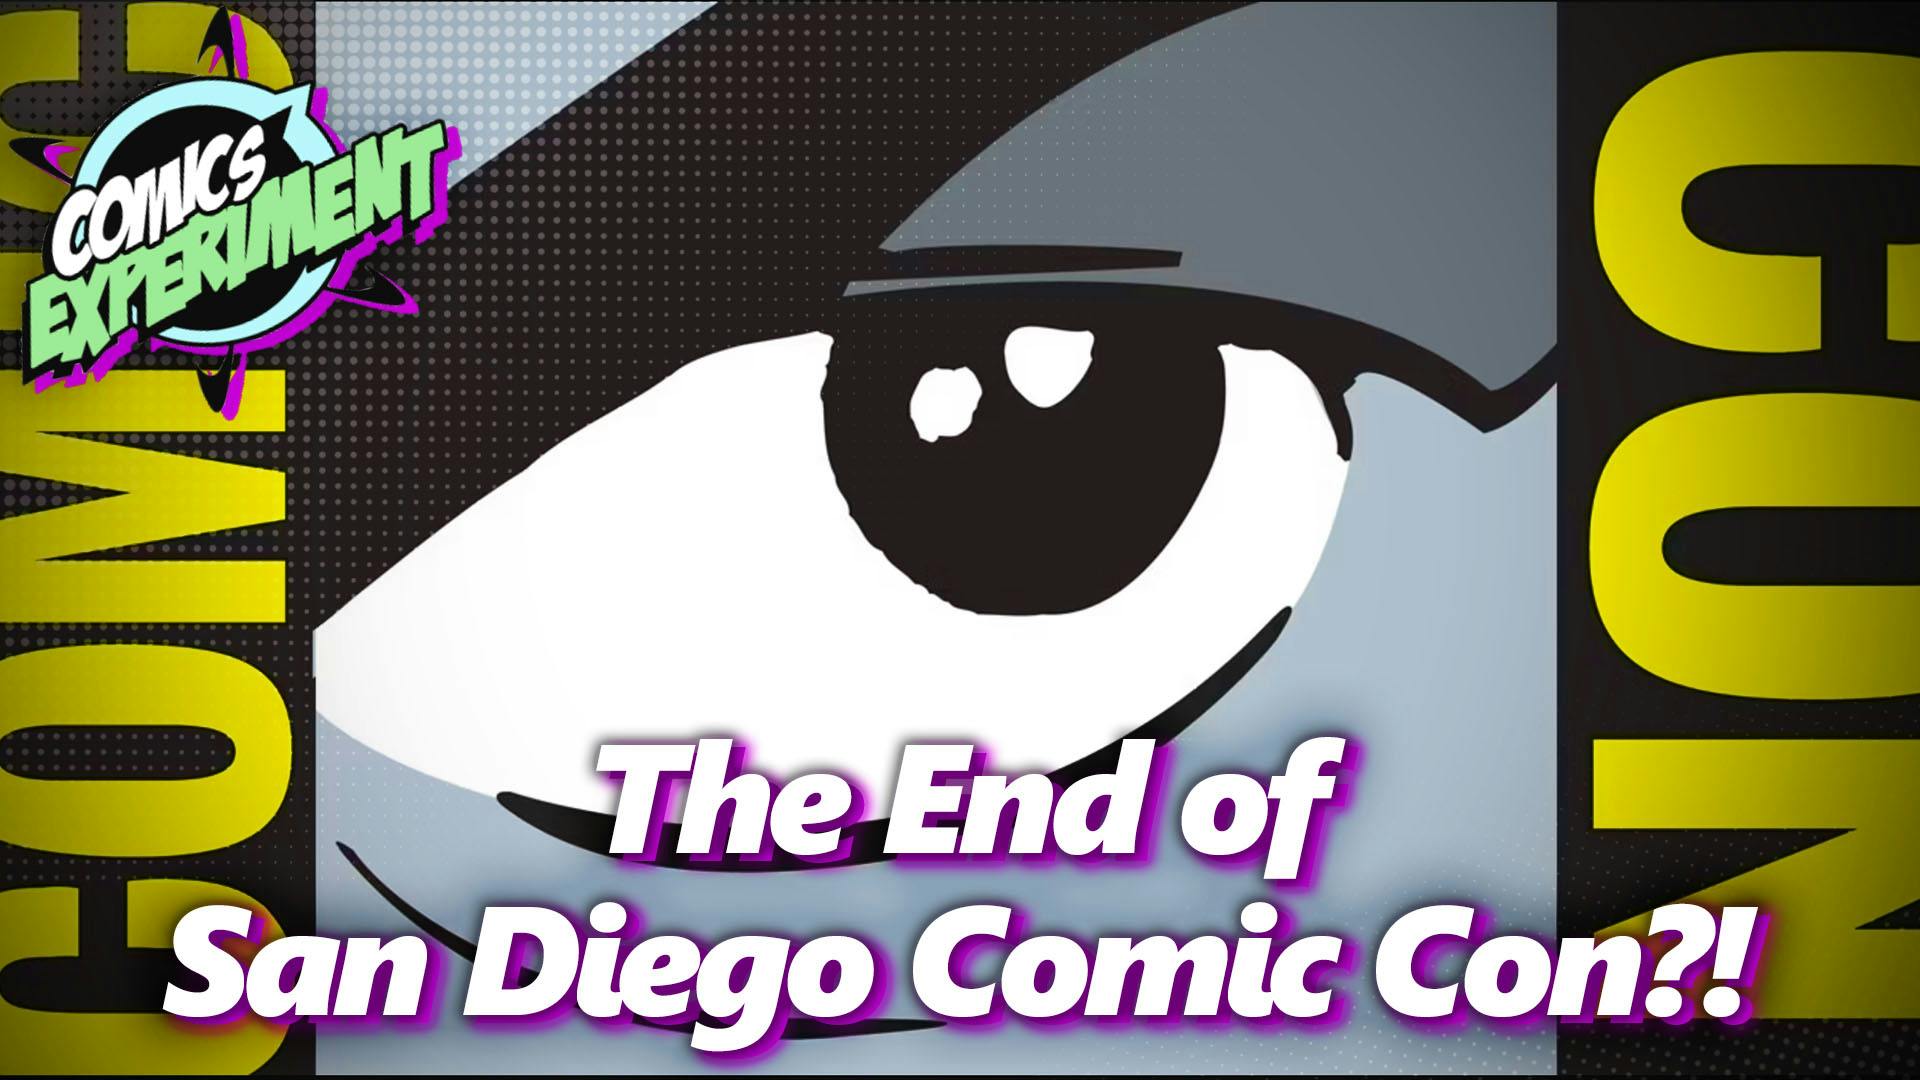 The End of San Diego Comic Con!